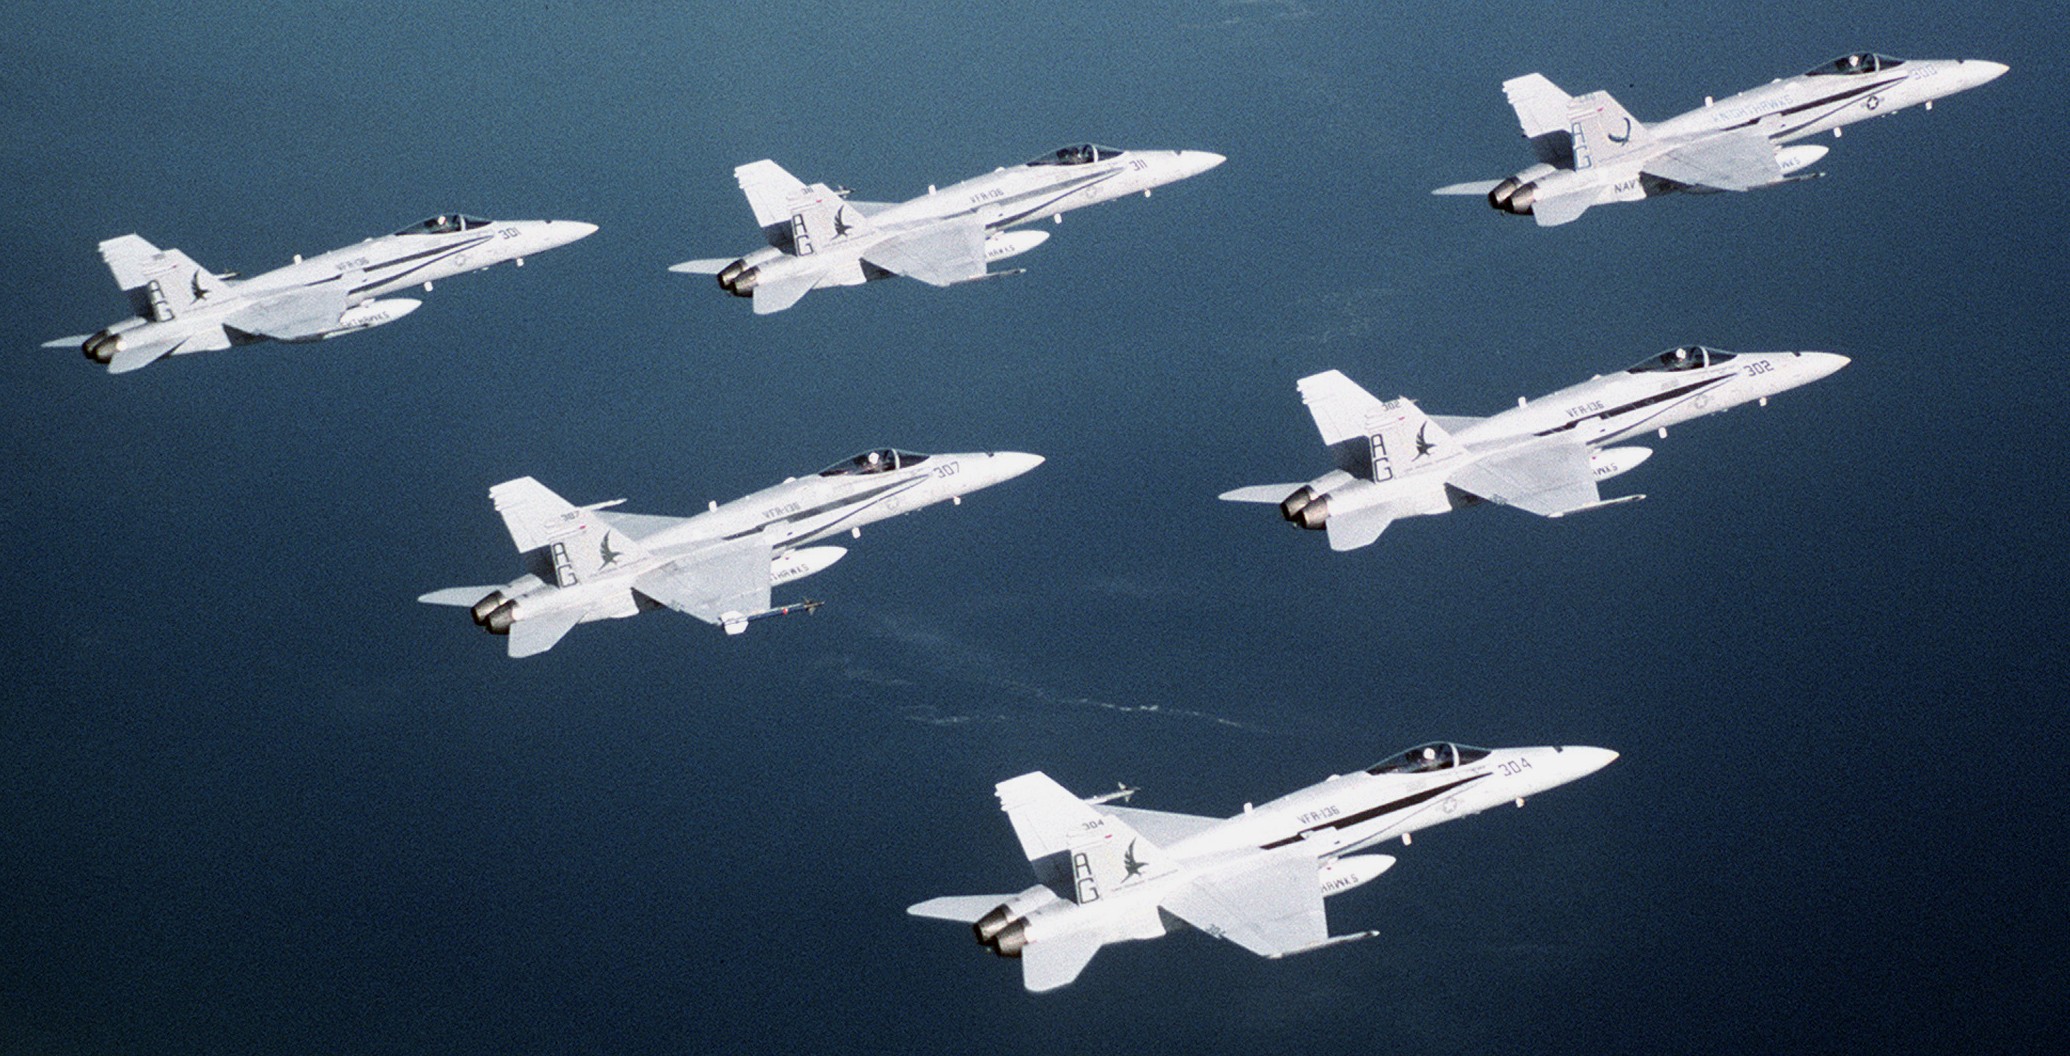 vfa-136 knighthawks strike fighter squadron f/a-18c hornet 1993 103 carrier air wing cvw-7